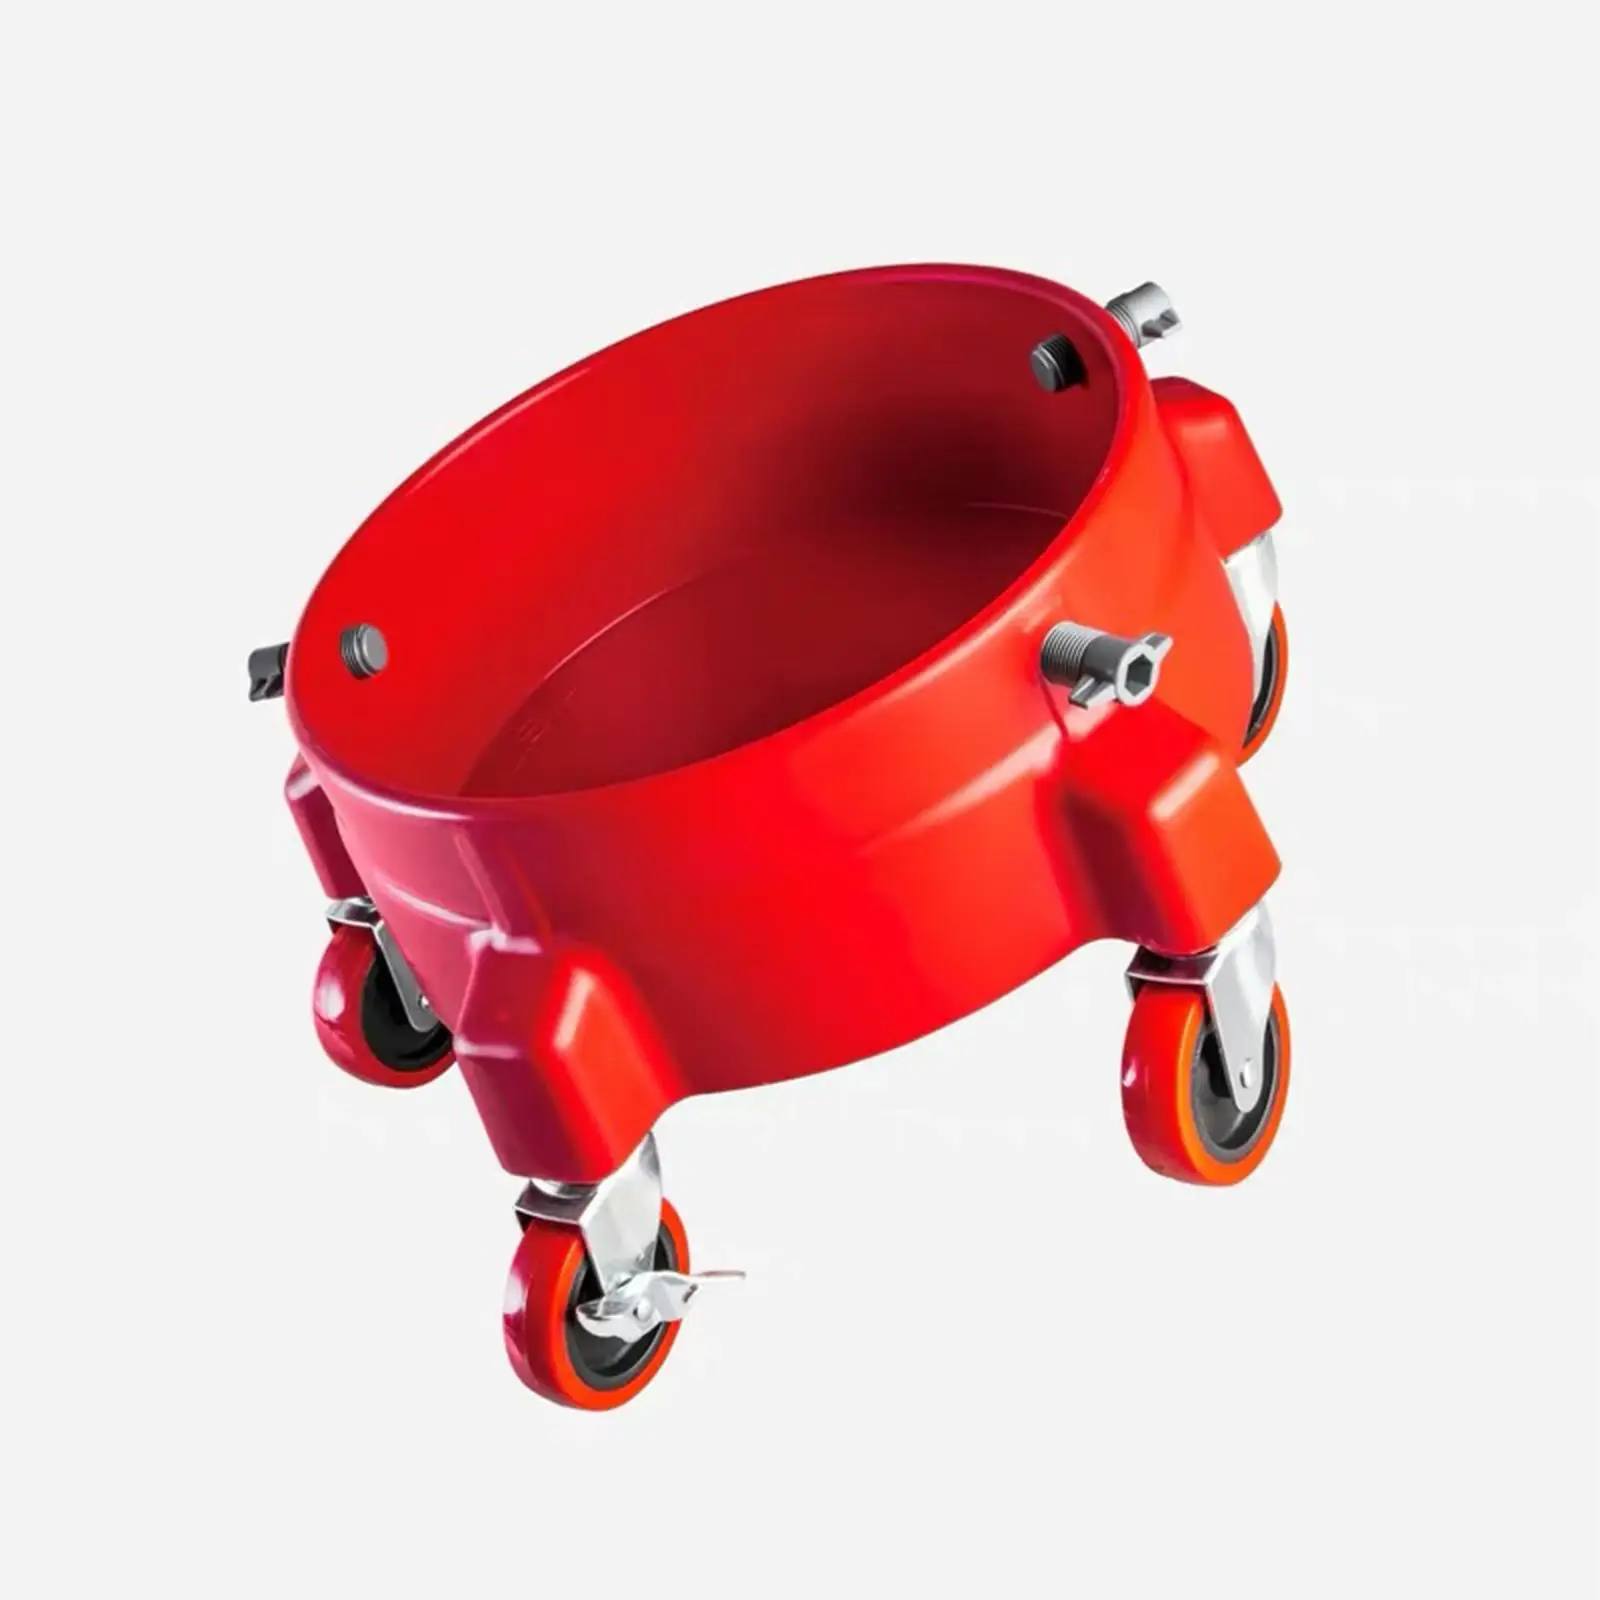 Car Wash Bucket Dolly Rolling Bucket Dolly Multifunctional for Painting Assistance Cleaners Building Workers Car Washing